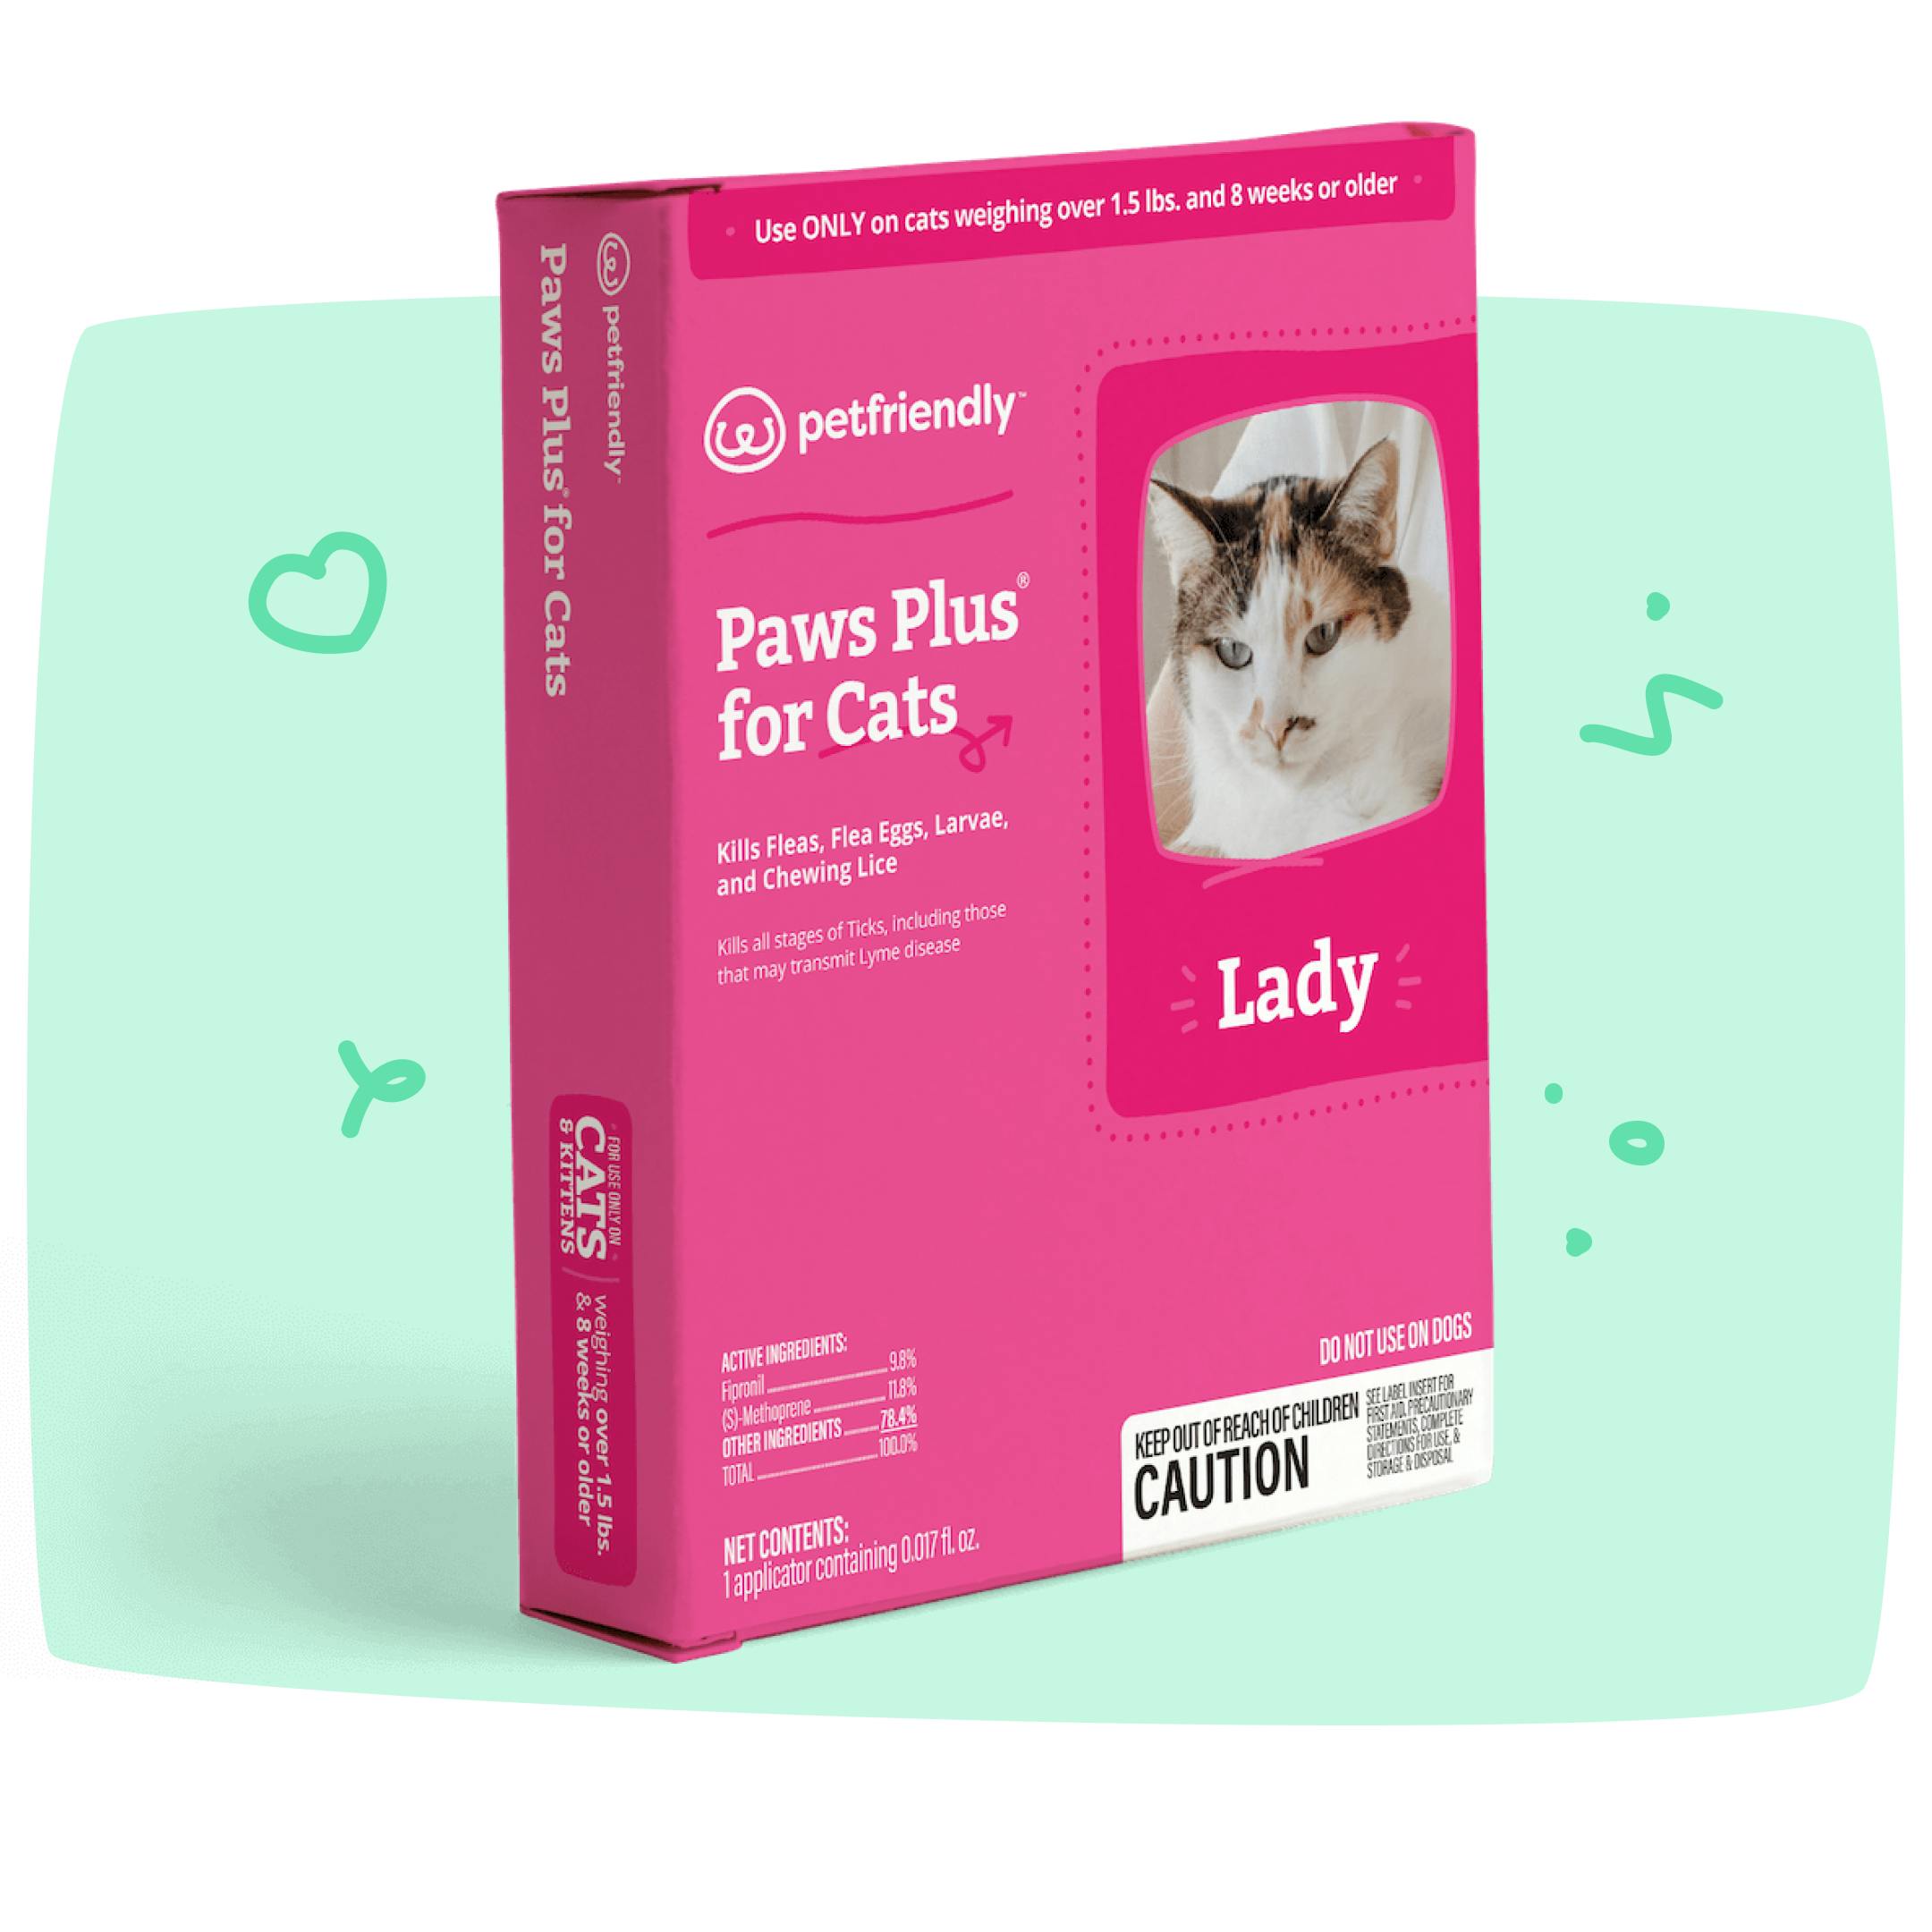 Paws Plus for Cats Product Box